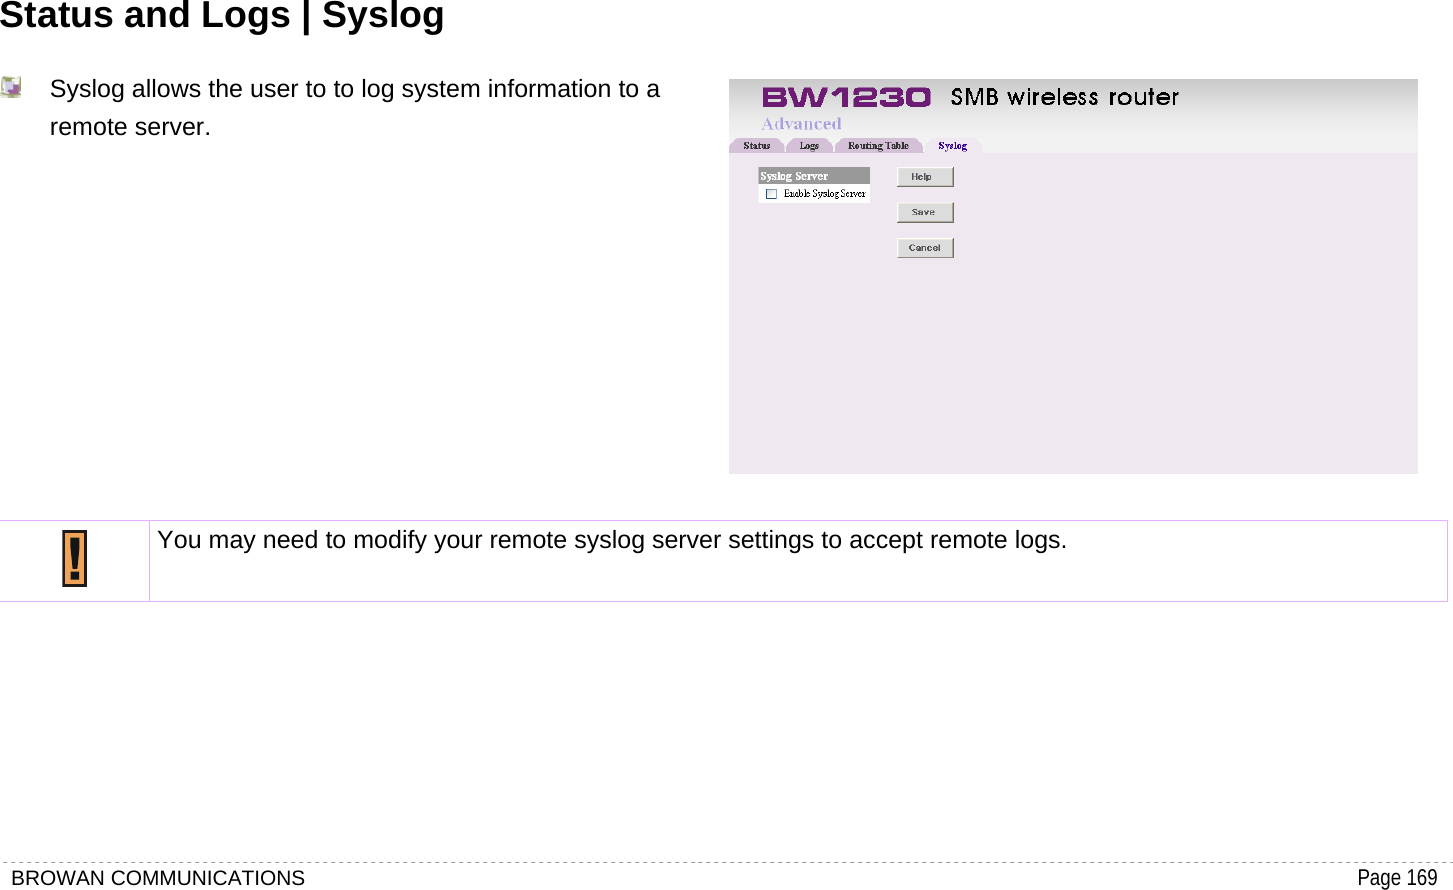 BROWAN COMMUNICATIONS                                                                                           Page 169  Status and Logs | Syslog   Syslog allows the user to to log system information to a remote server.    You may need to modify your remote syslog server settings to accept remote logs.     